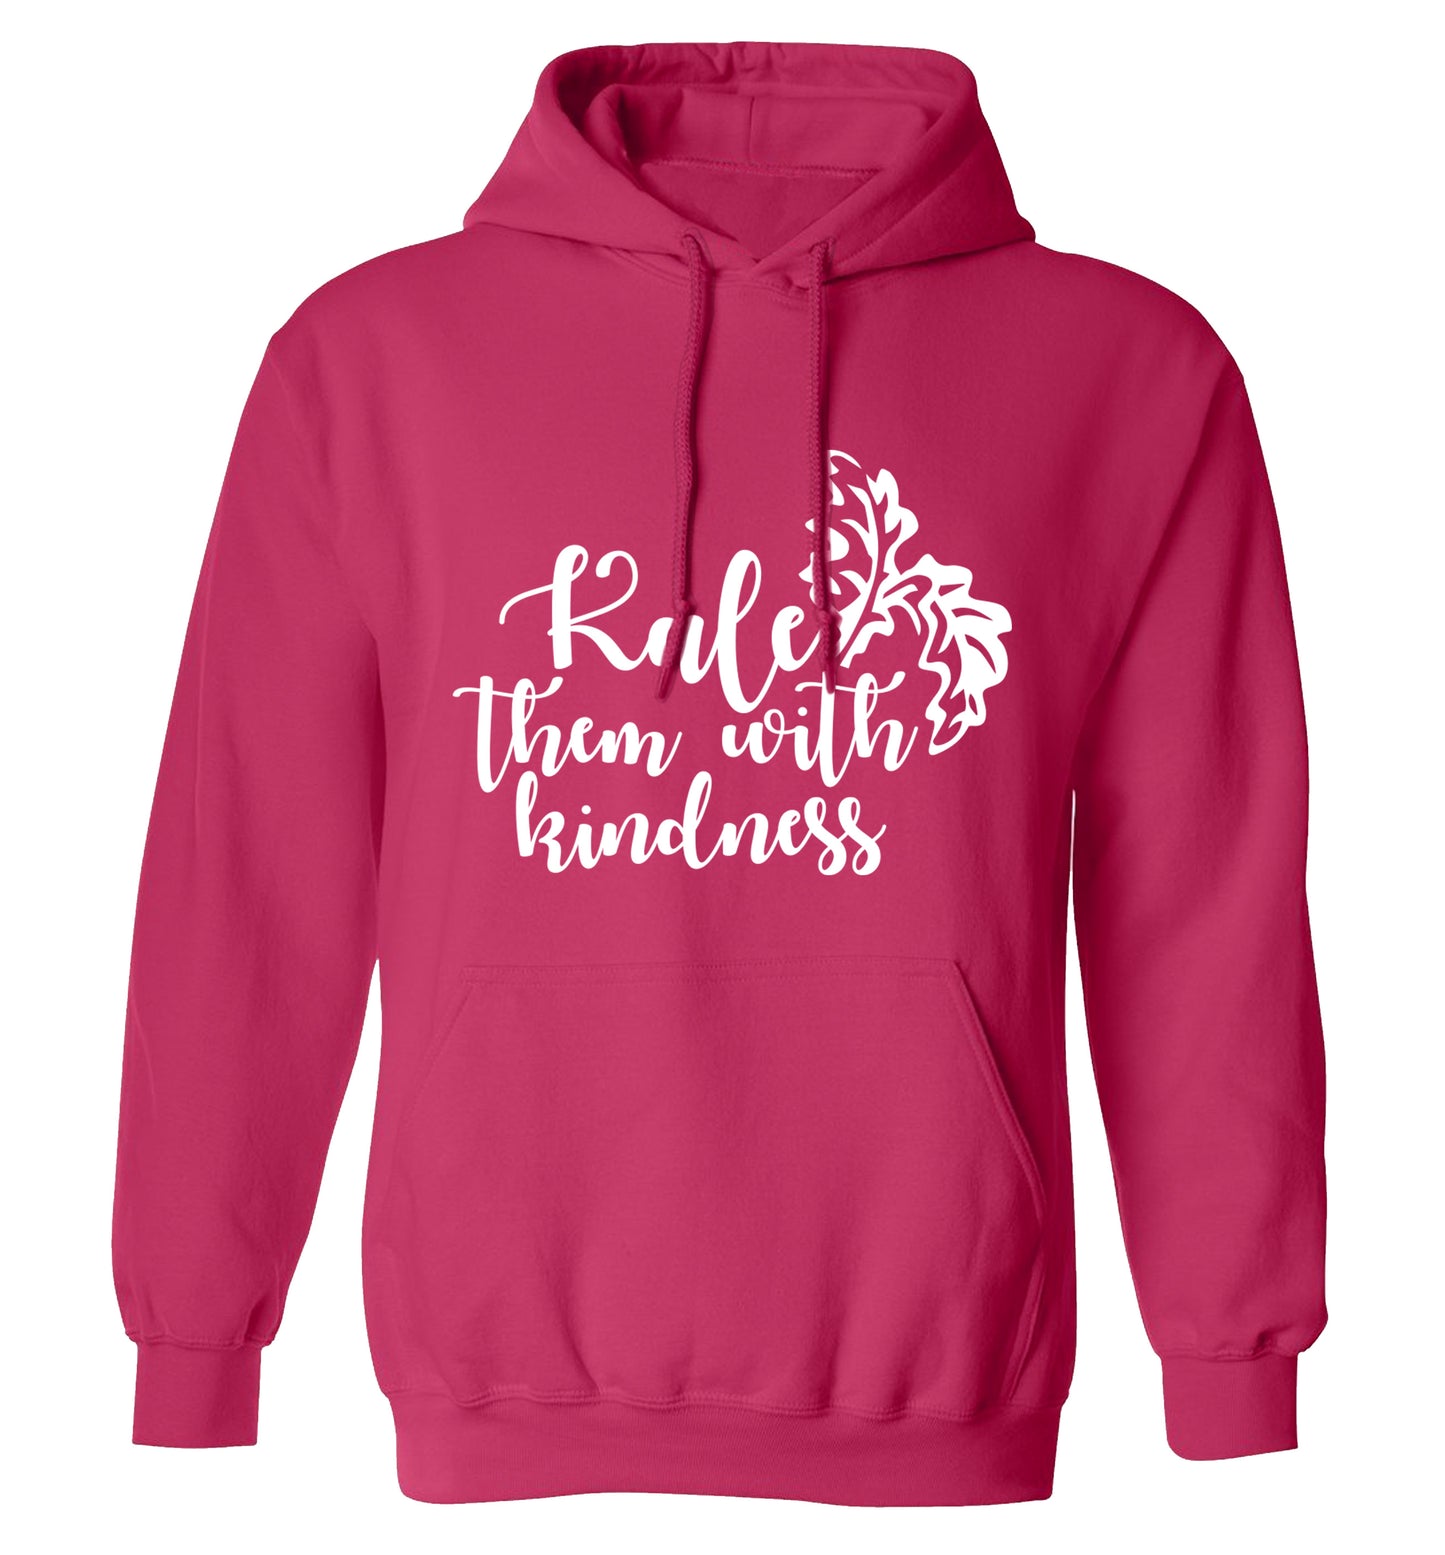 Kale them with kindness adults unisex pink hoodie 2XL